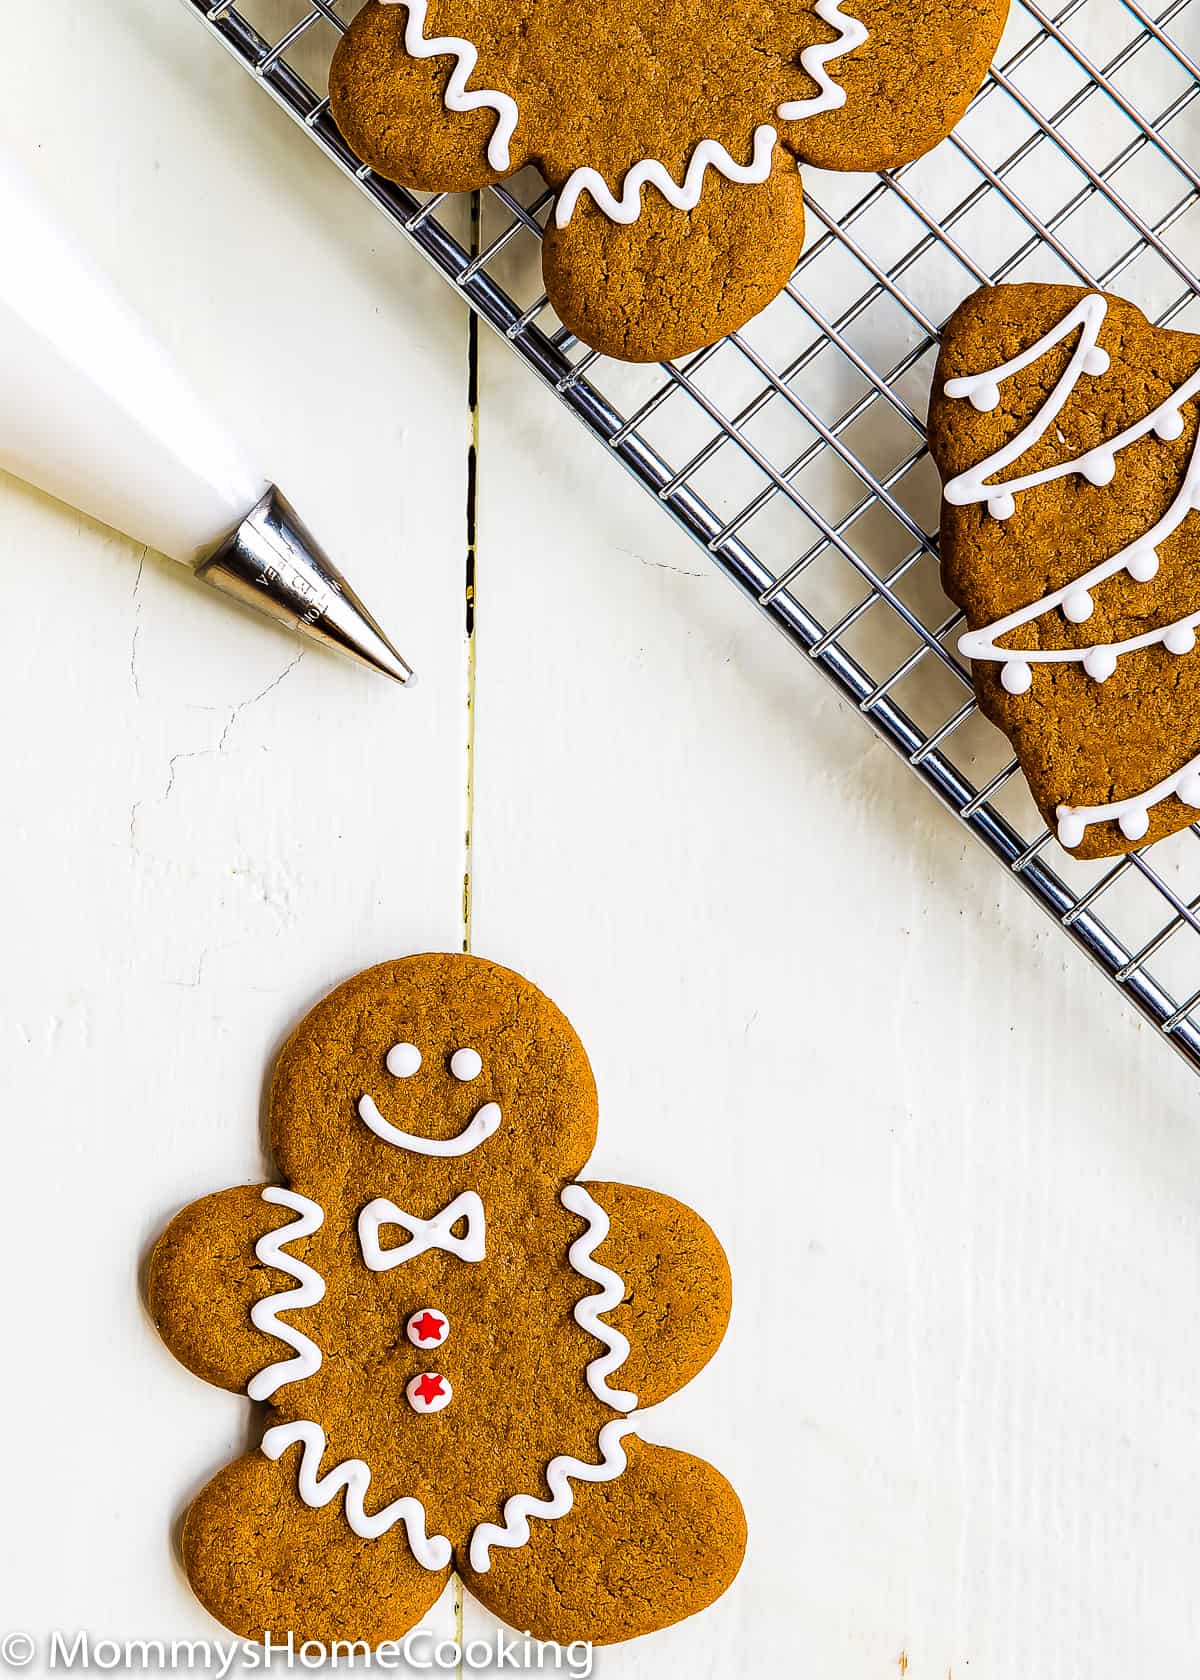 Eggless Gingerbread man Cookie over a wooden surface with a piping bag with eggless royal icing in it.